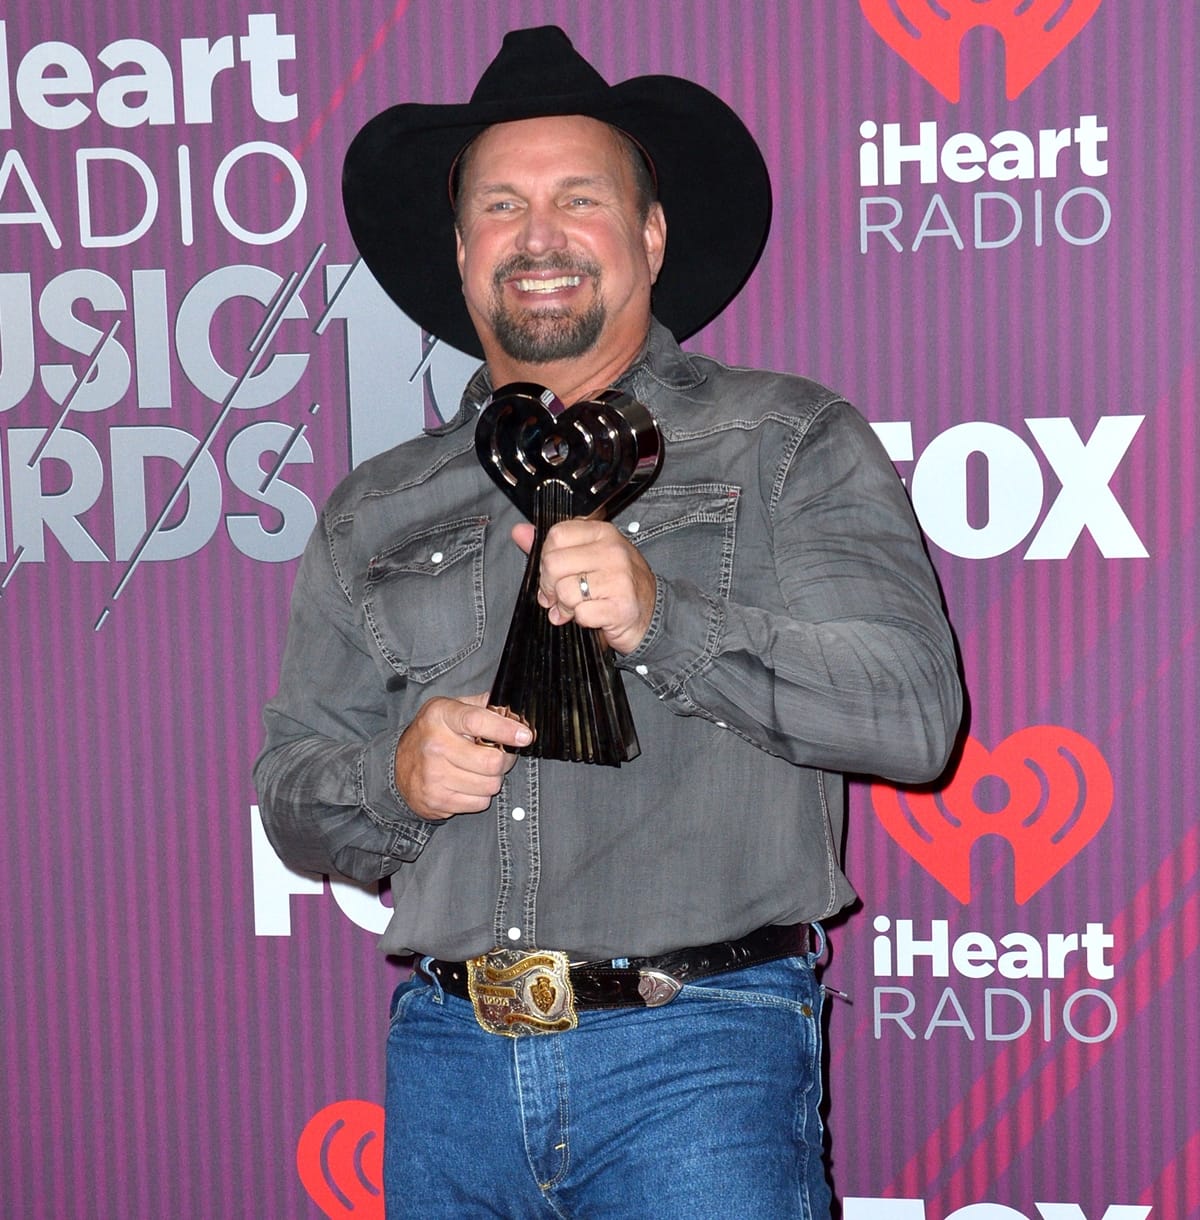 Garth Brooks is one of the richest country artists of all time with a net worth of $400 million